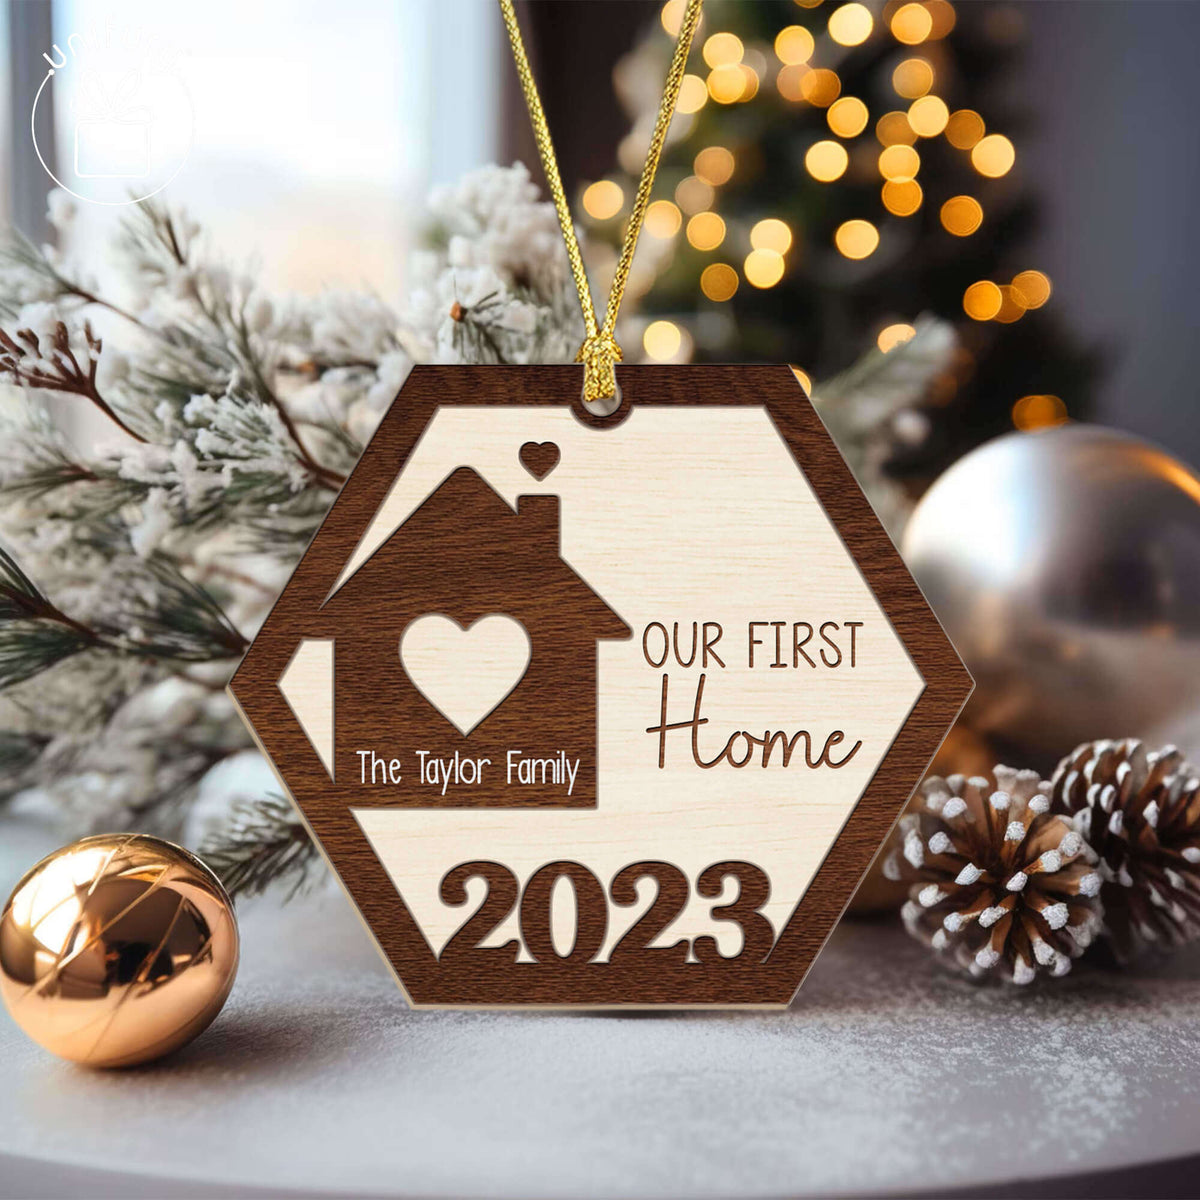 Our First Home as Family Wooden Shape Ornament